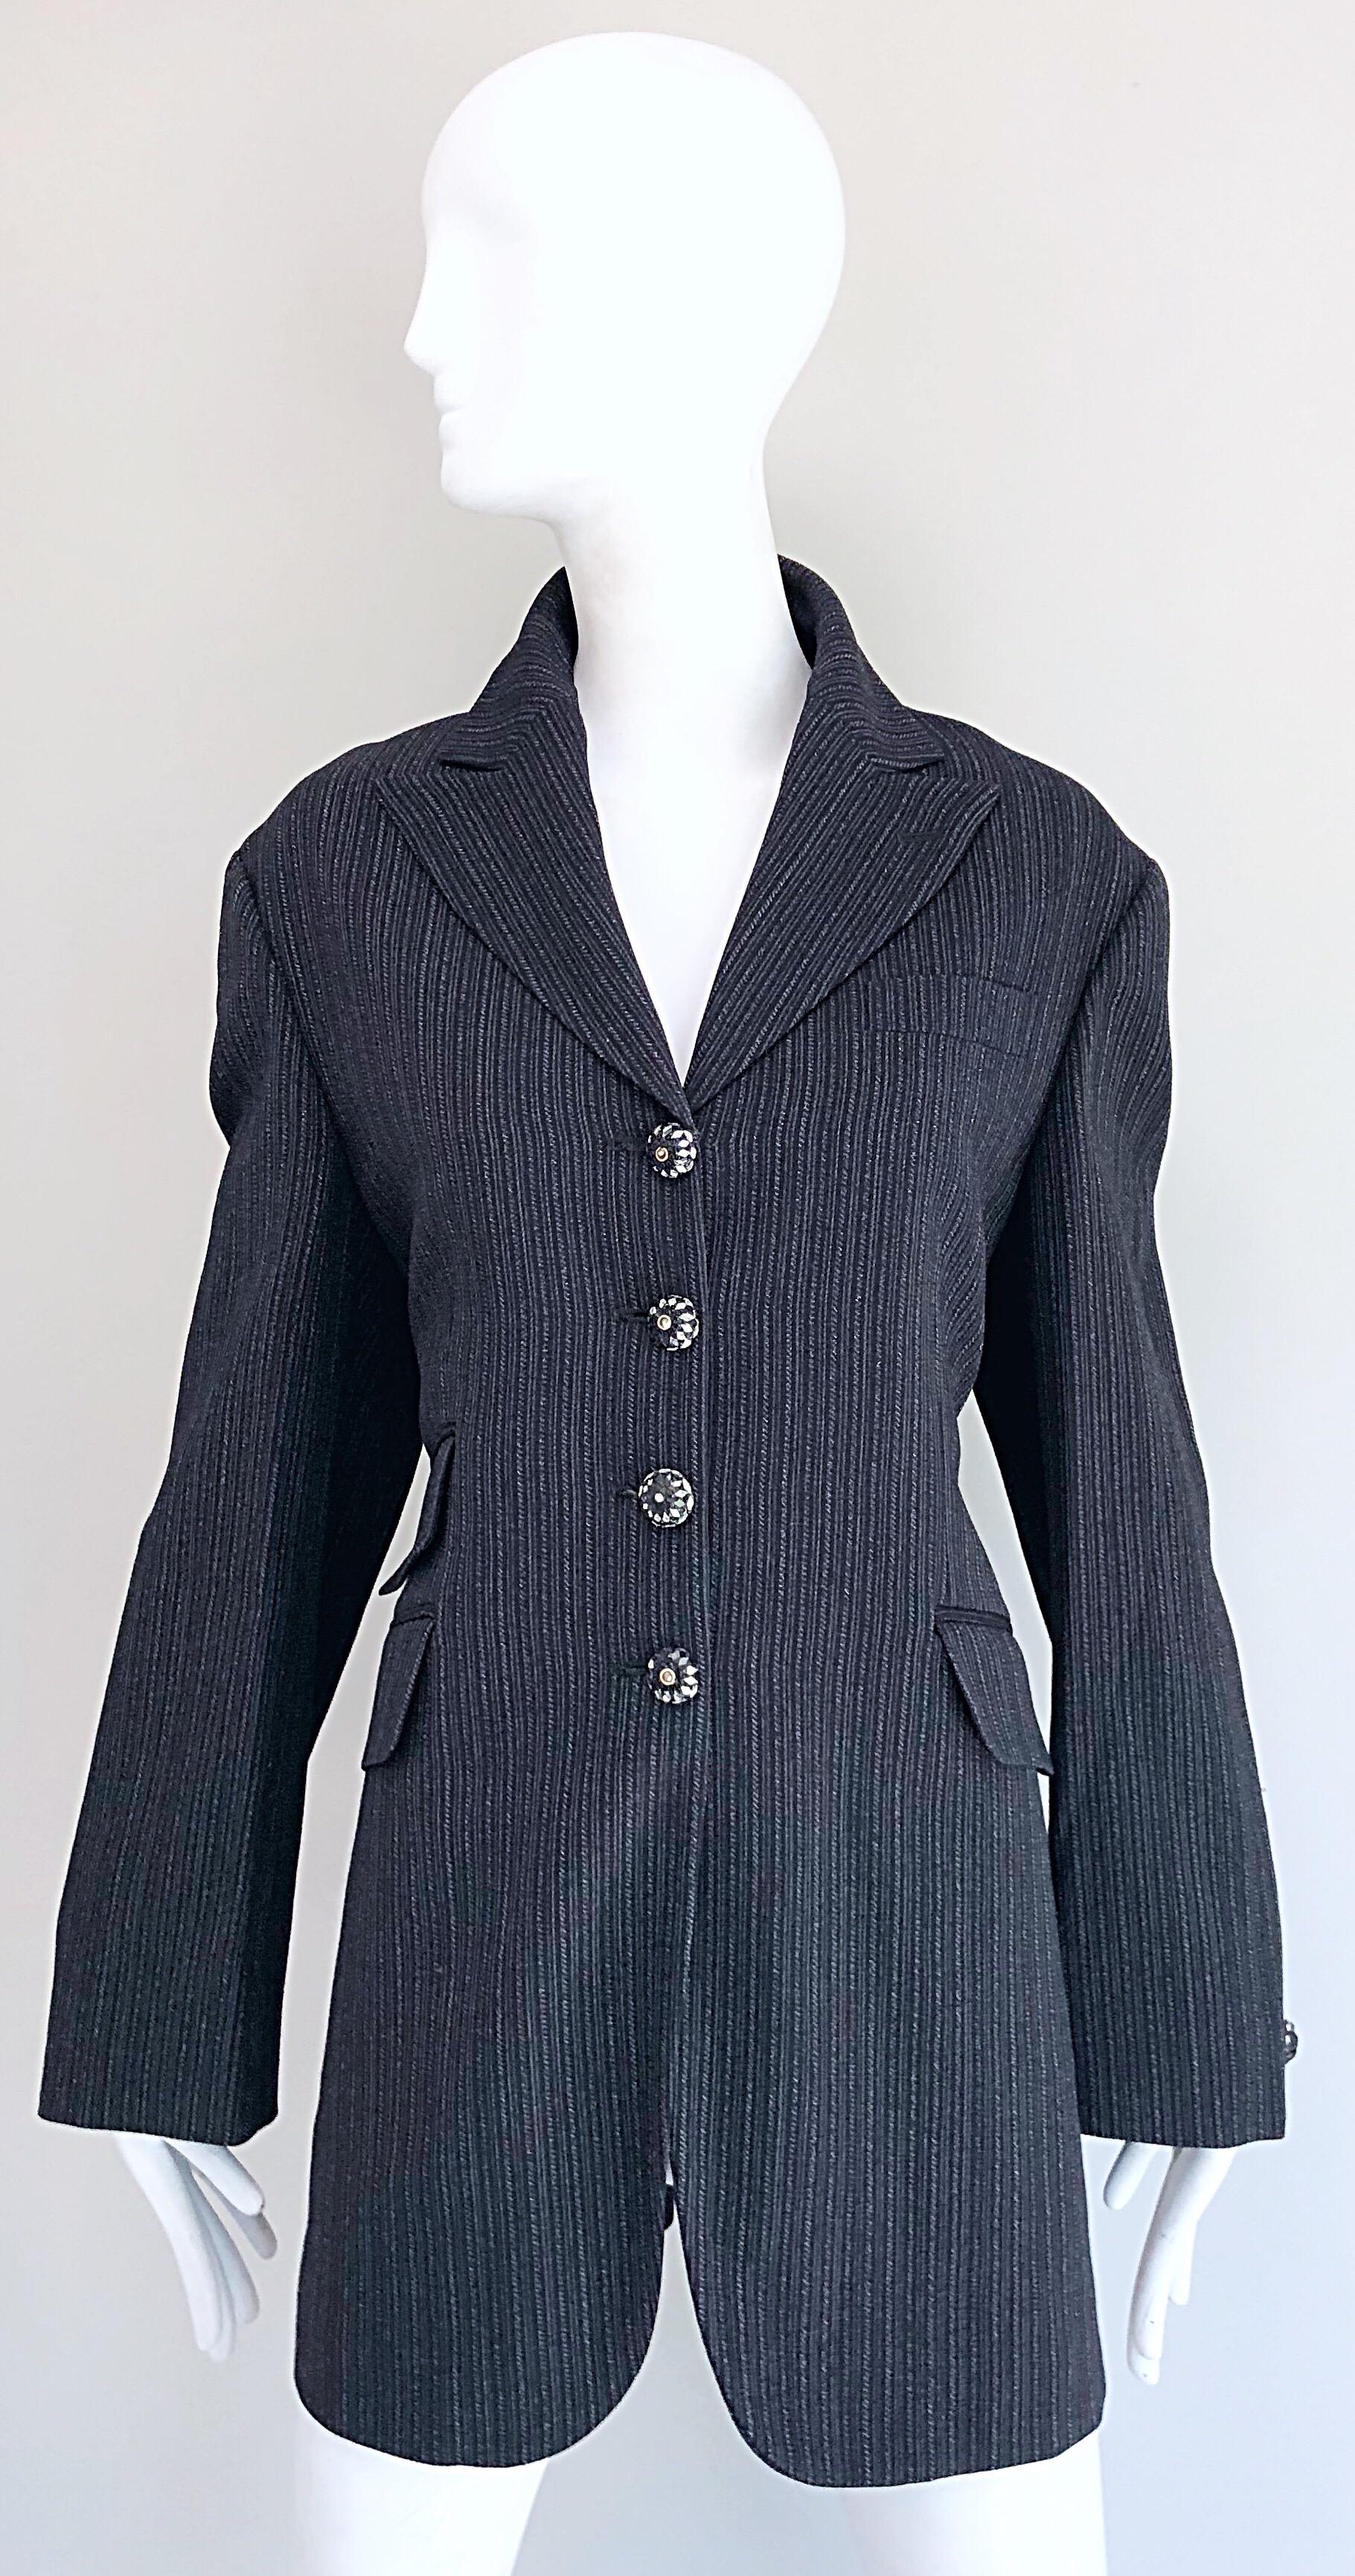 Stylish vintage early 90s ROMEO GIGLI gray and black pinstriped minimalist le smoking blazer jacket! Impeccably tailored, and a fantastic fit! Features Avant Garde rhinestone encrusted buttons up the front and at each sleeve cuff. Chic oversized